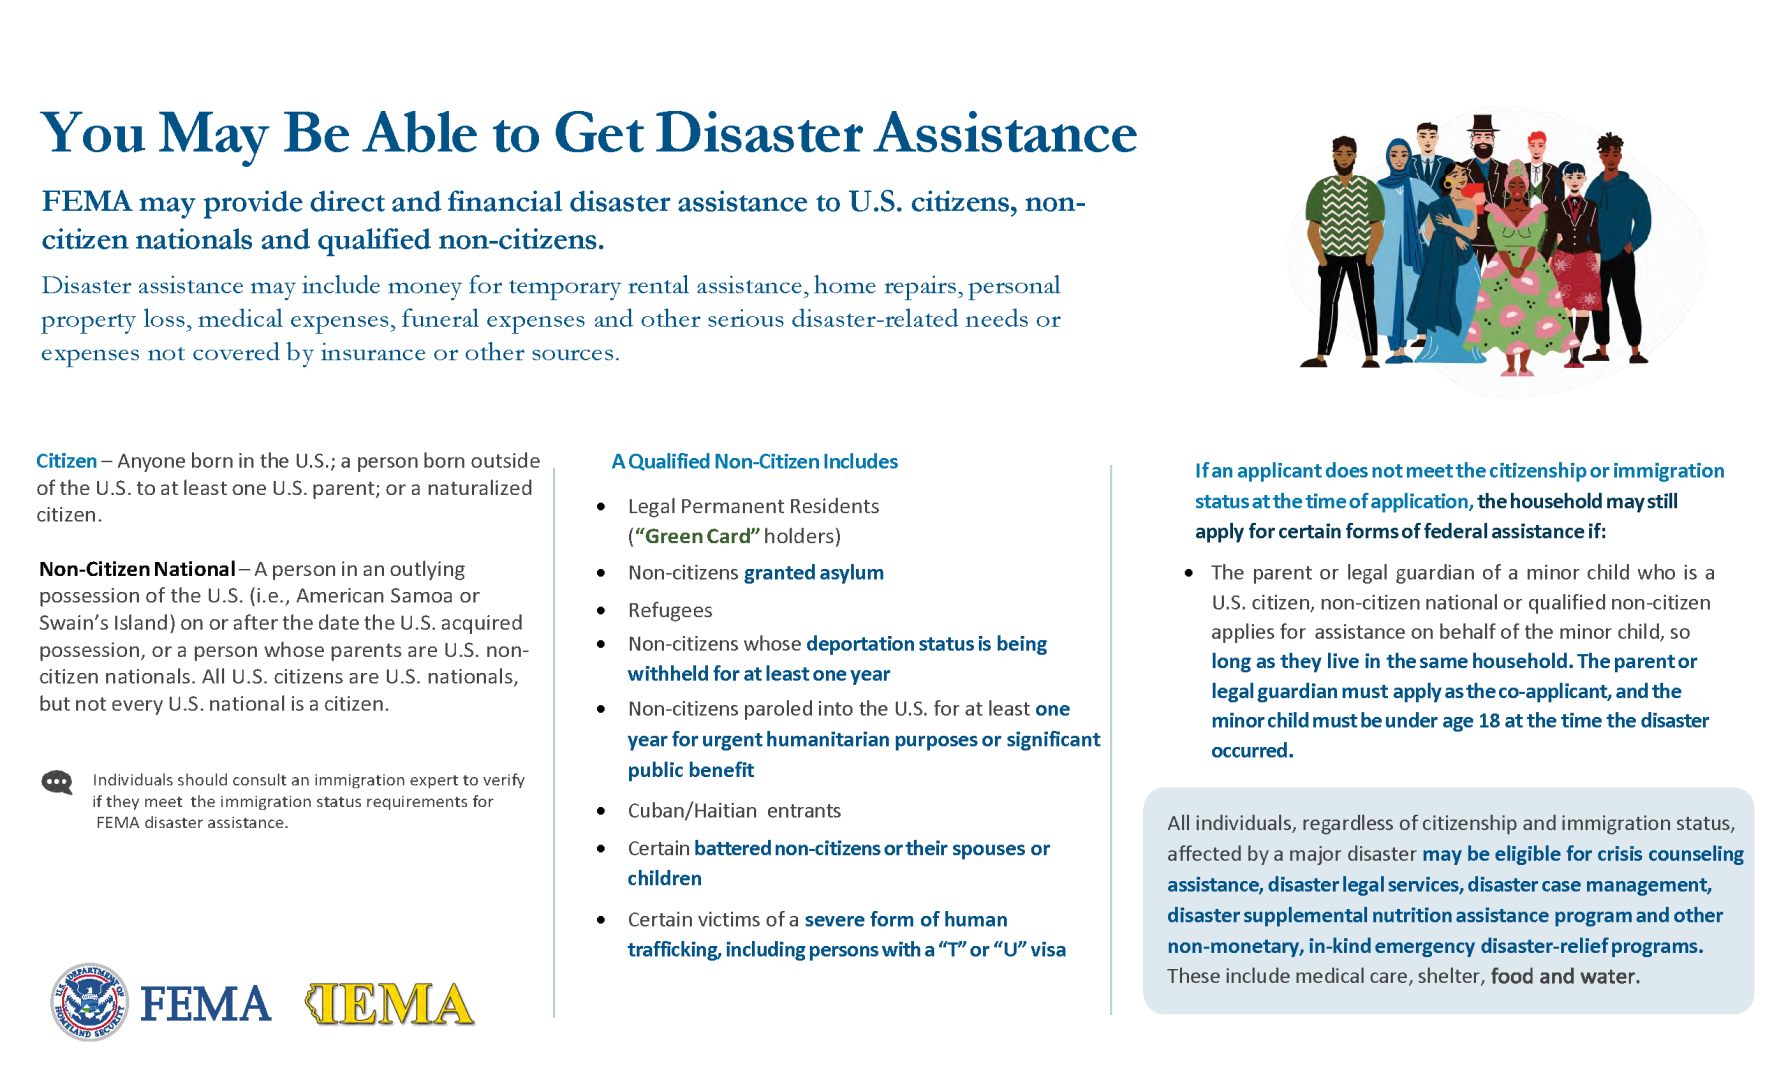 Qualifying for Disaster Assistance: Citizenship and Immigration Status Flyer